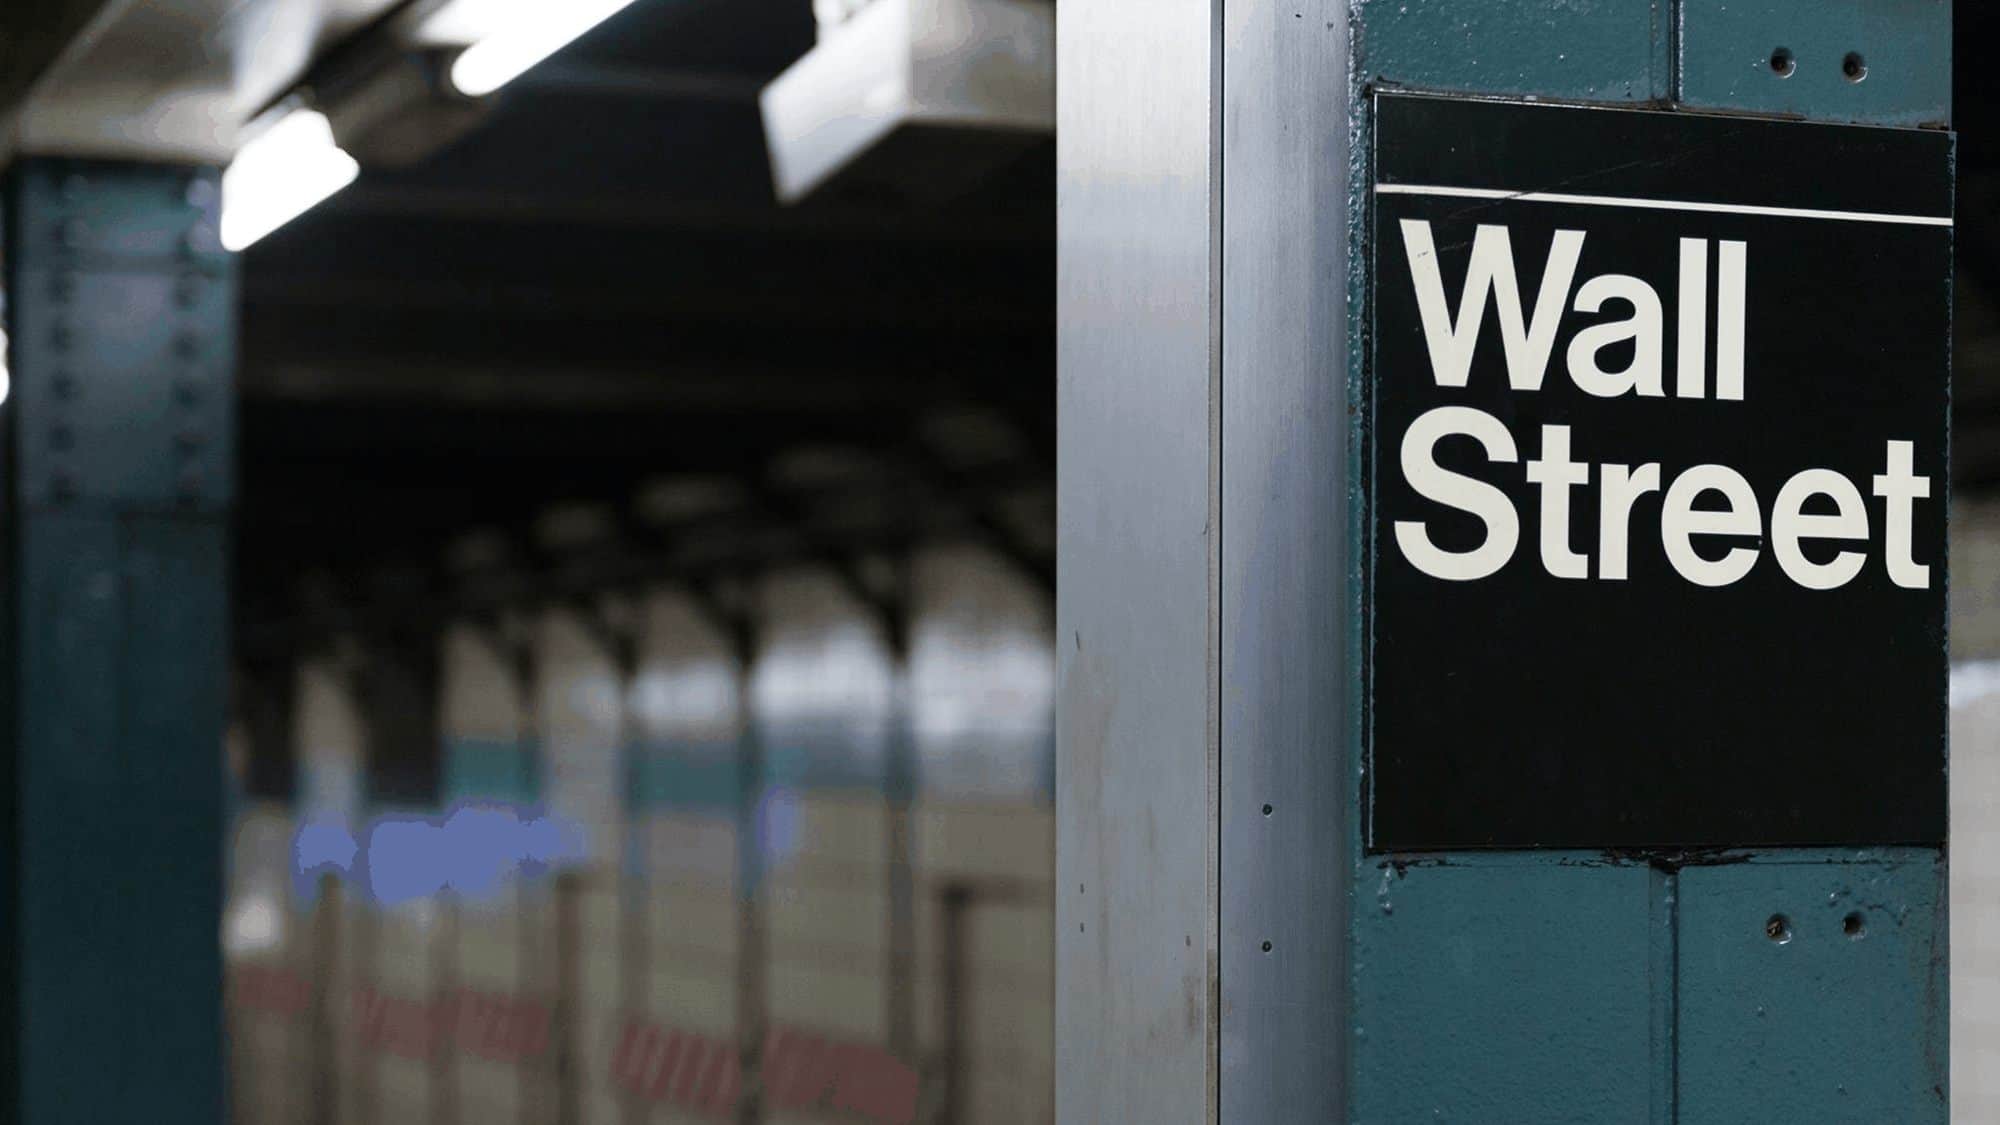 Subway sign reads "Wall Street".